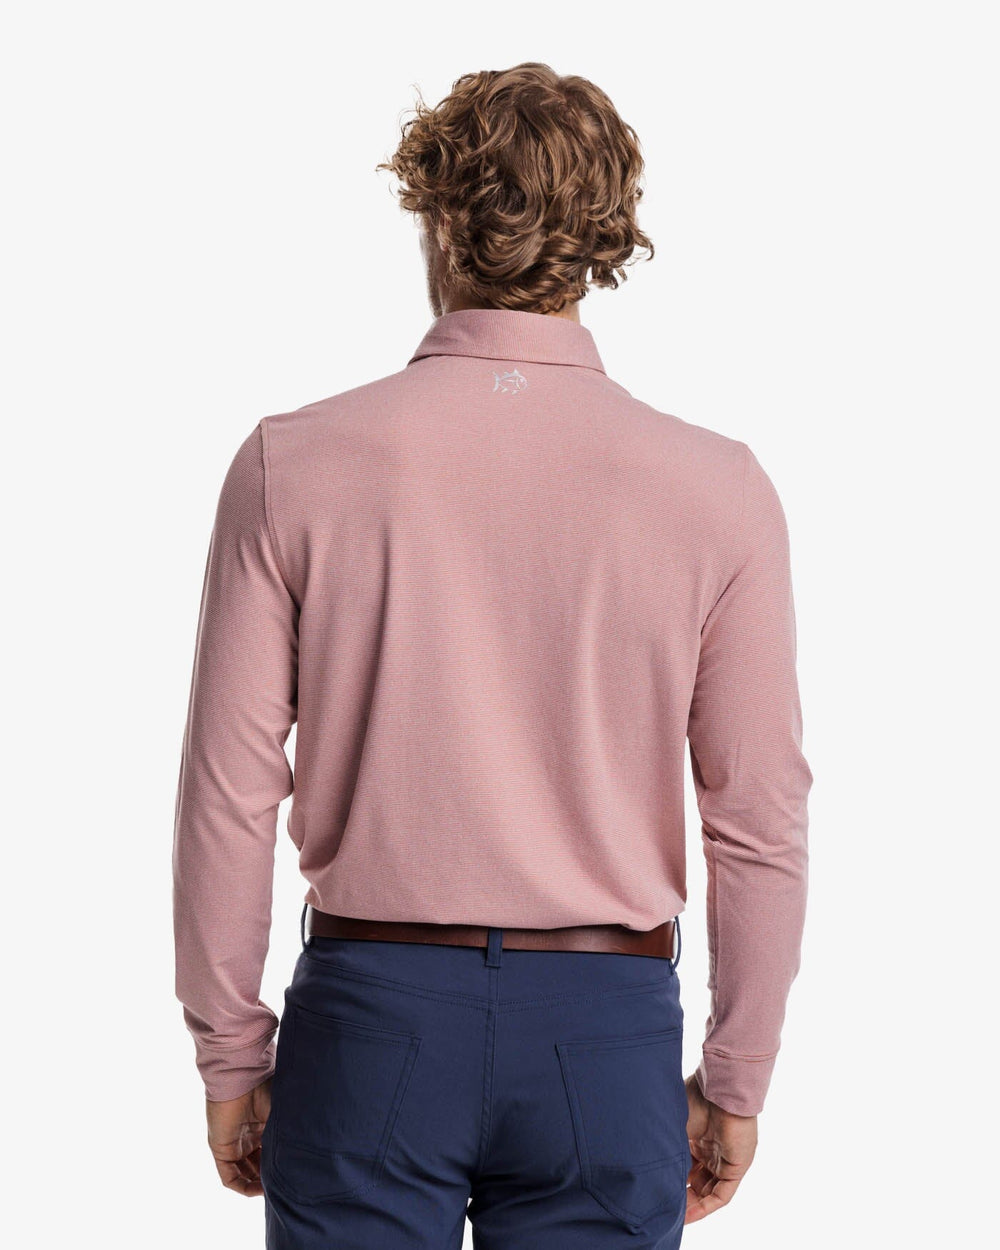 The back view of the Southern Tide Ryder Heather Ridgeway Stripe Long Sleeve Performance Polo by Southern Tide - Heather Dusty Coral